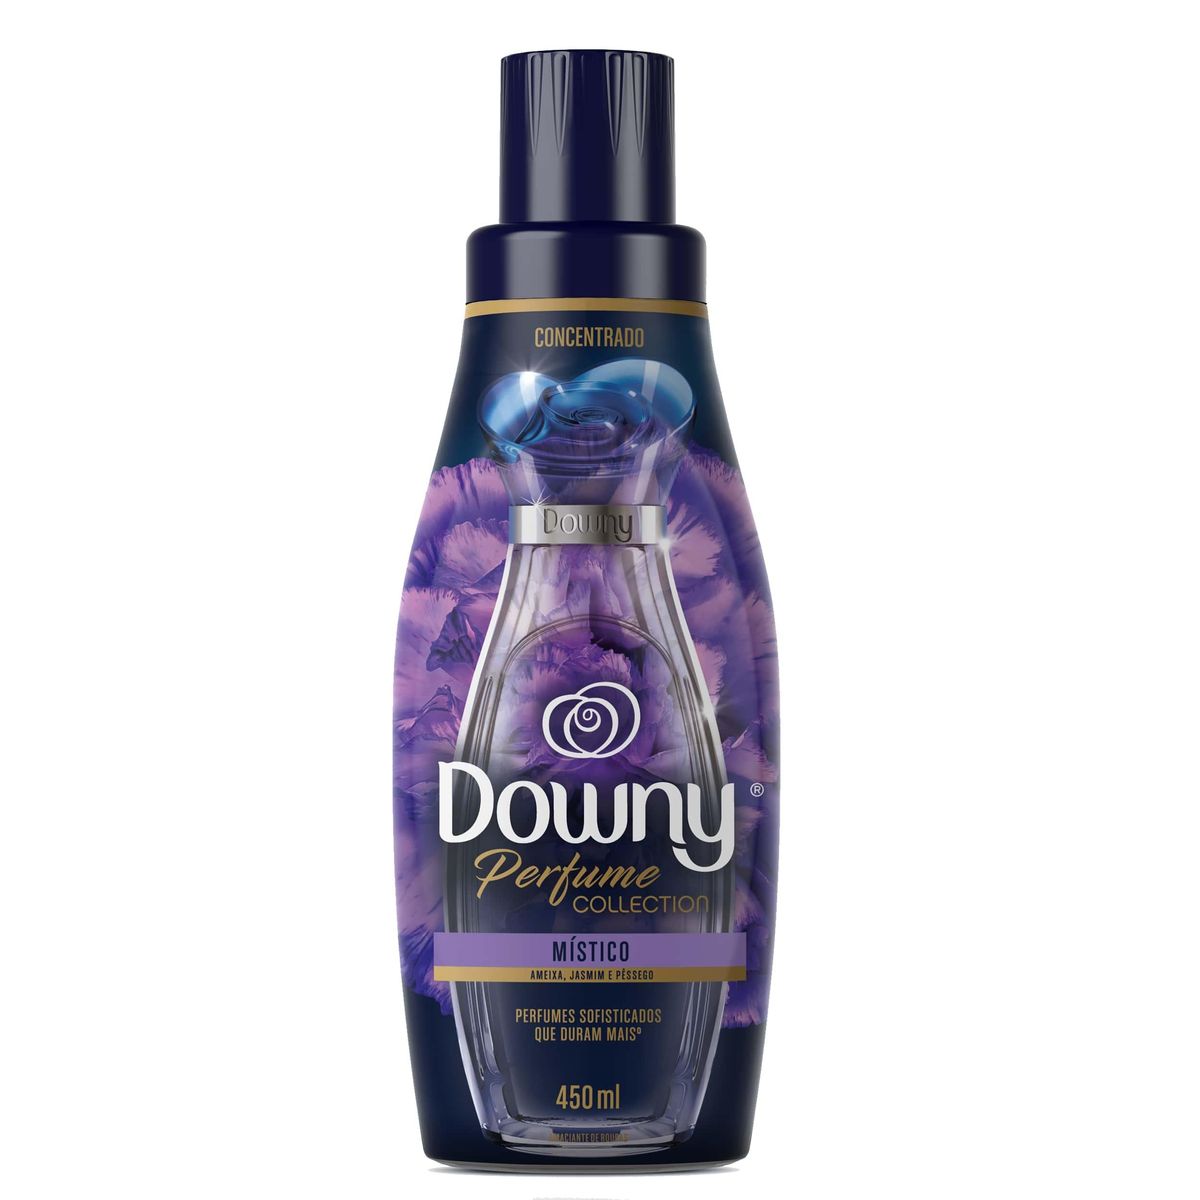 Amaciante Conc. Downy Perfume Collection Místico 450ml image number 0